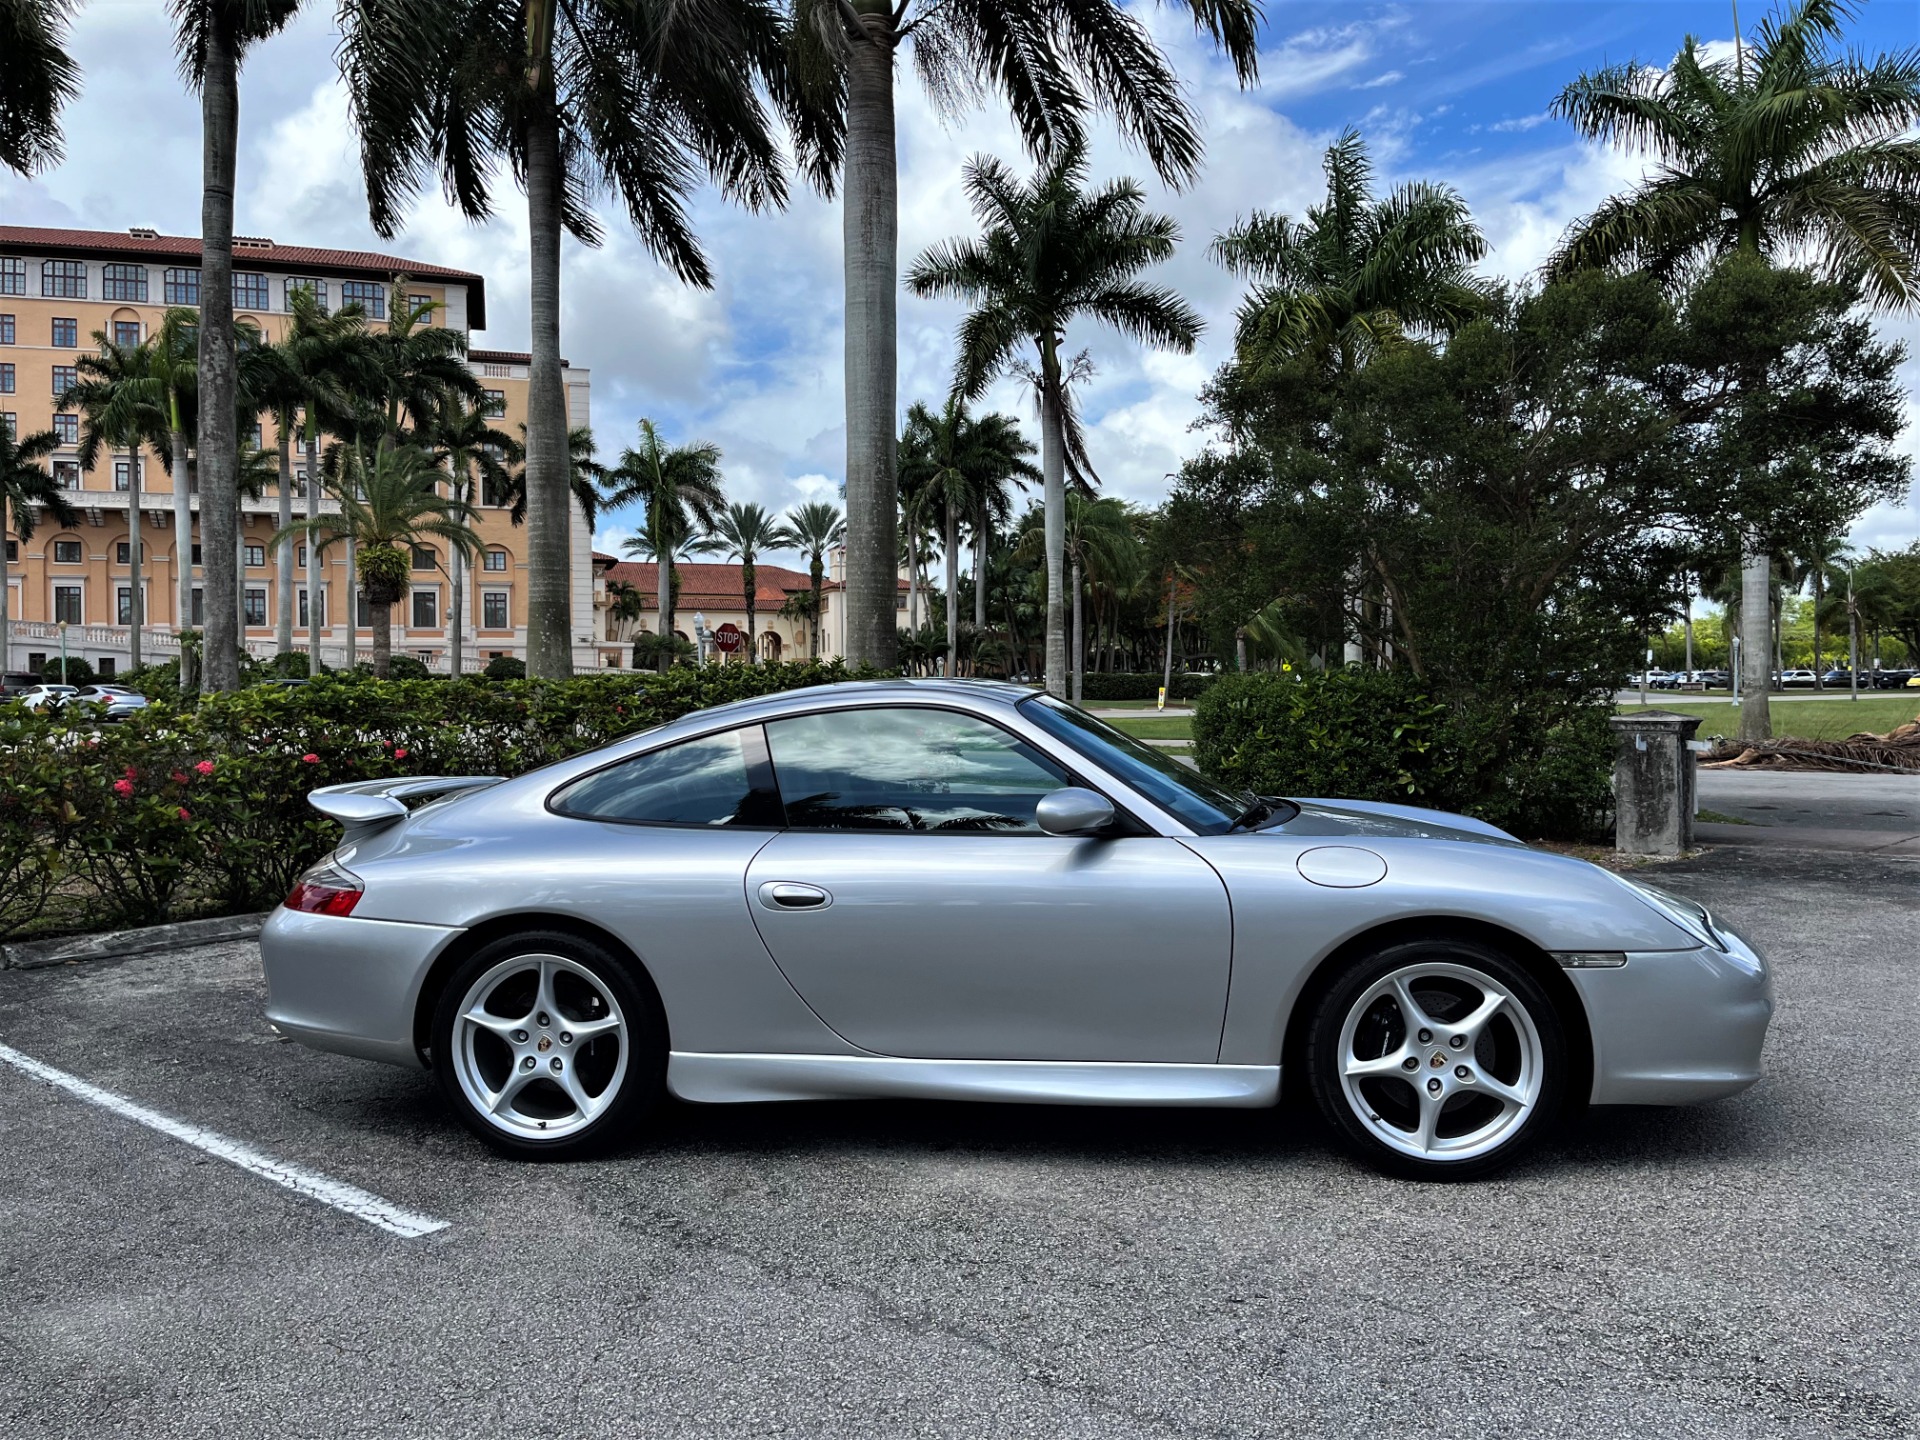 Used 2002 Porsche 911 Carrera for sale Sold at The Gables Sports Cars in Miami FL 33146 2